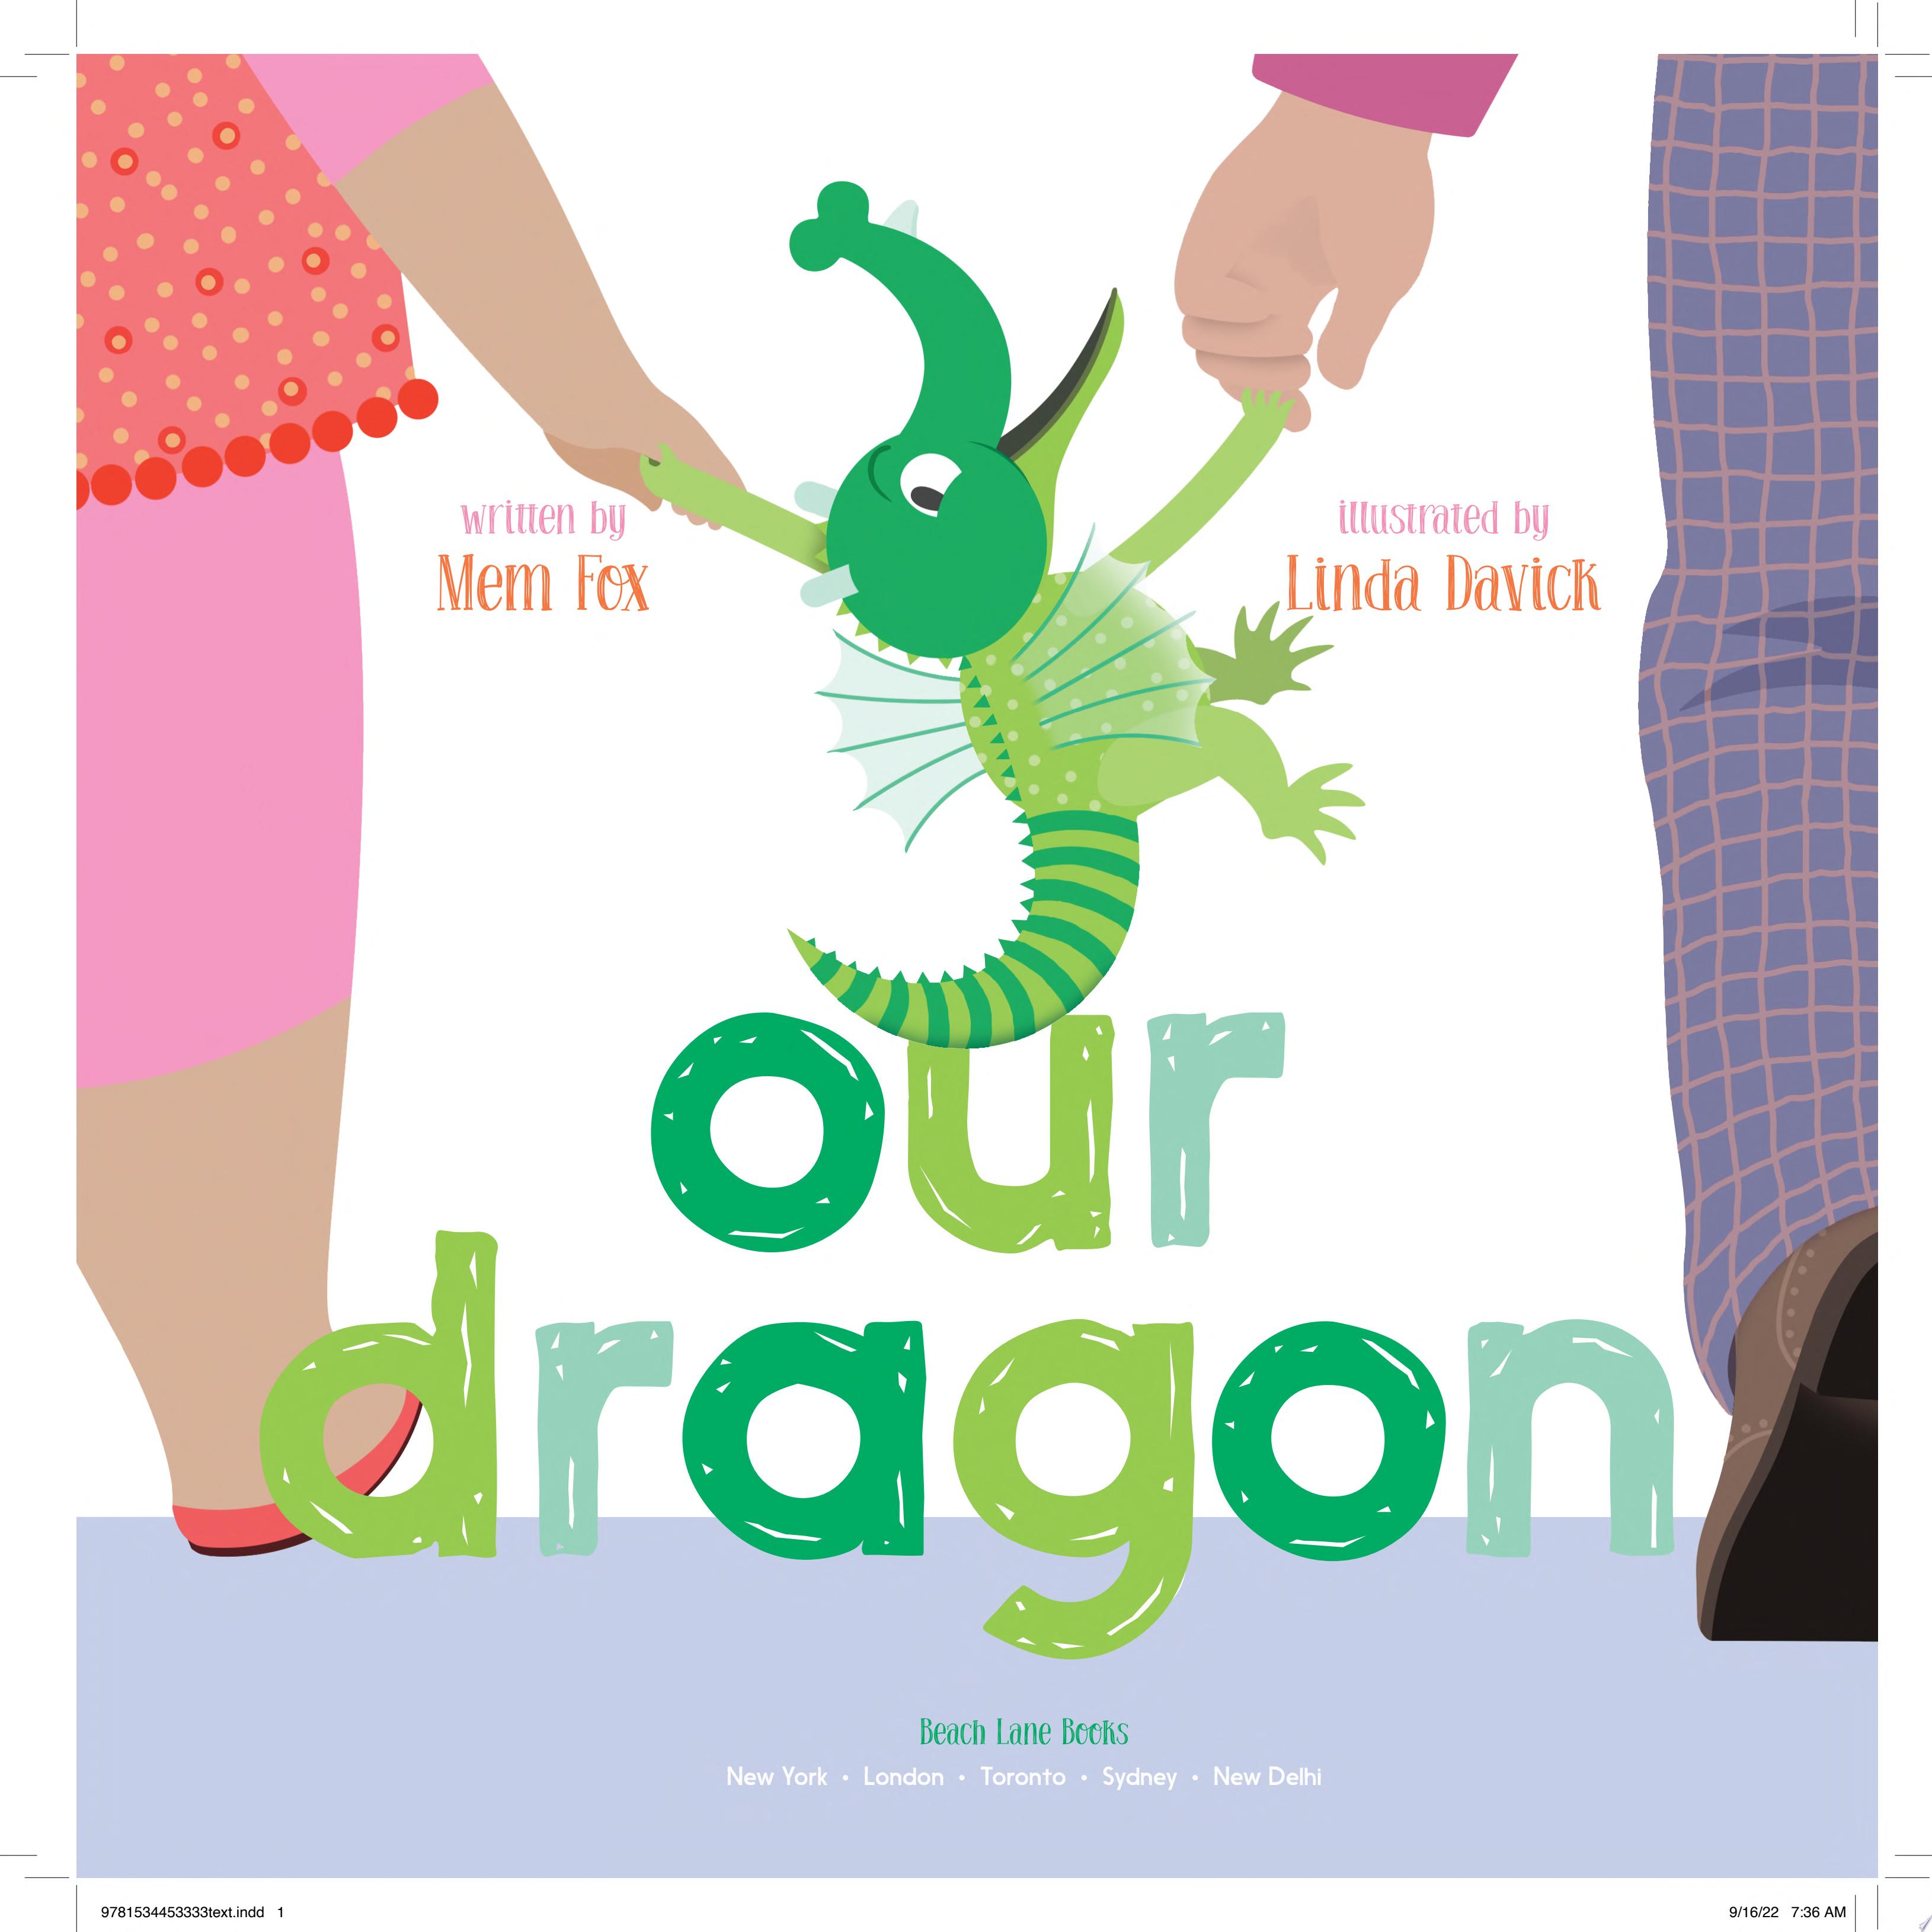 Image for "Our Dragon"